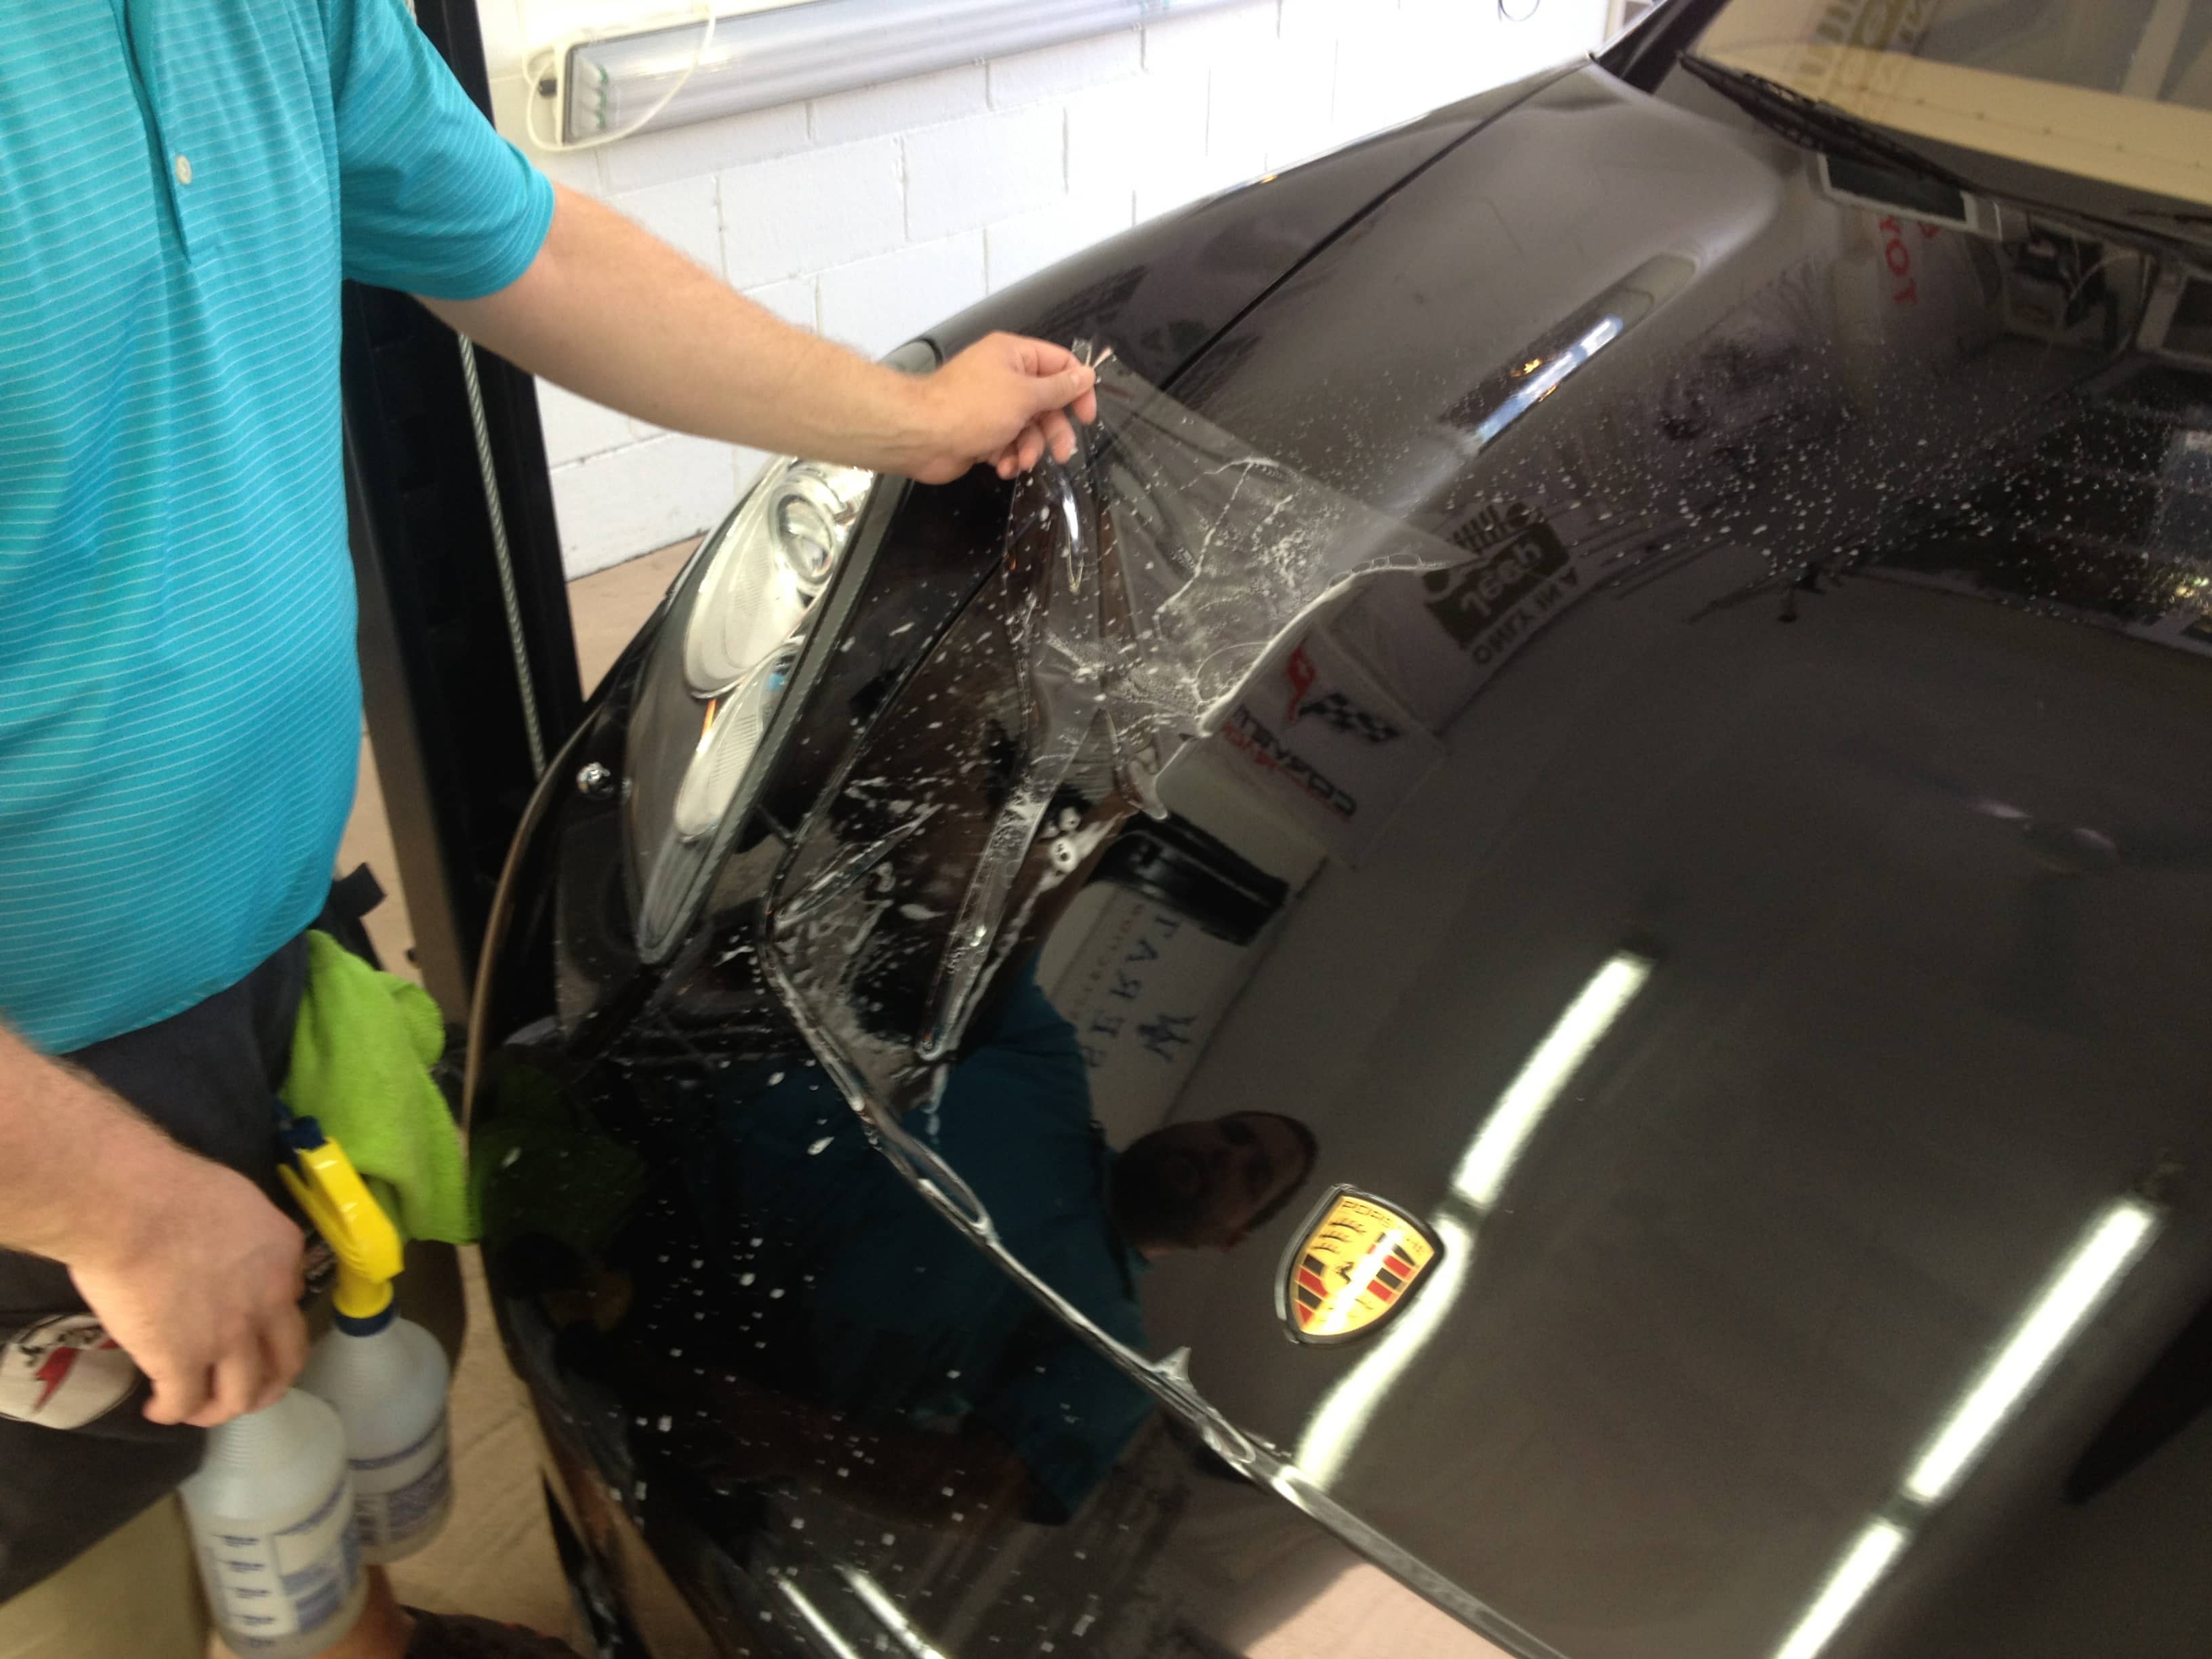 2013 Porsche Panamera - clear advantage of using Clear Auto Bra for rock chips damage XPEL paint protection film